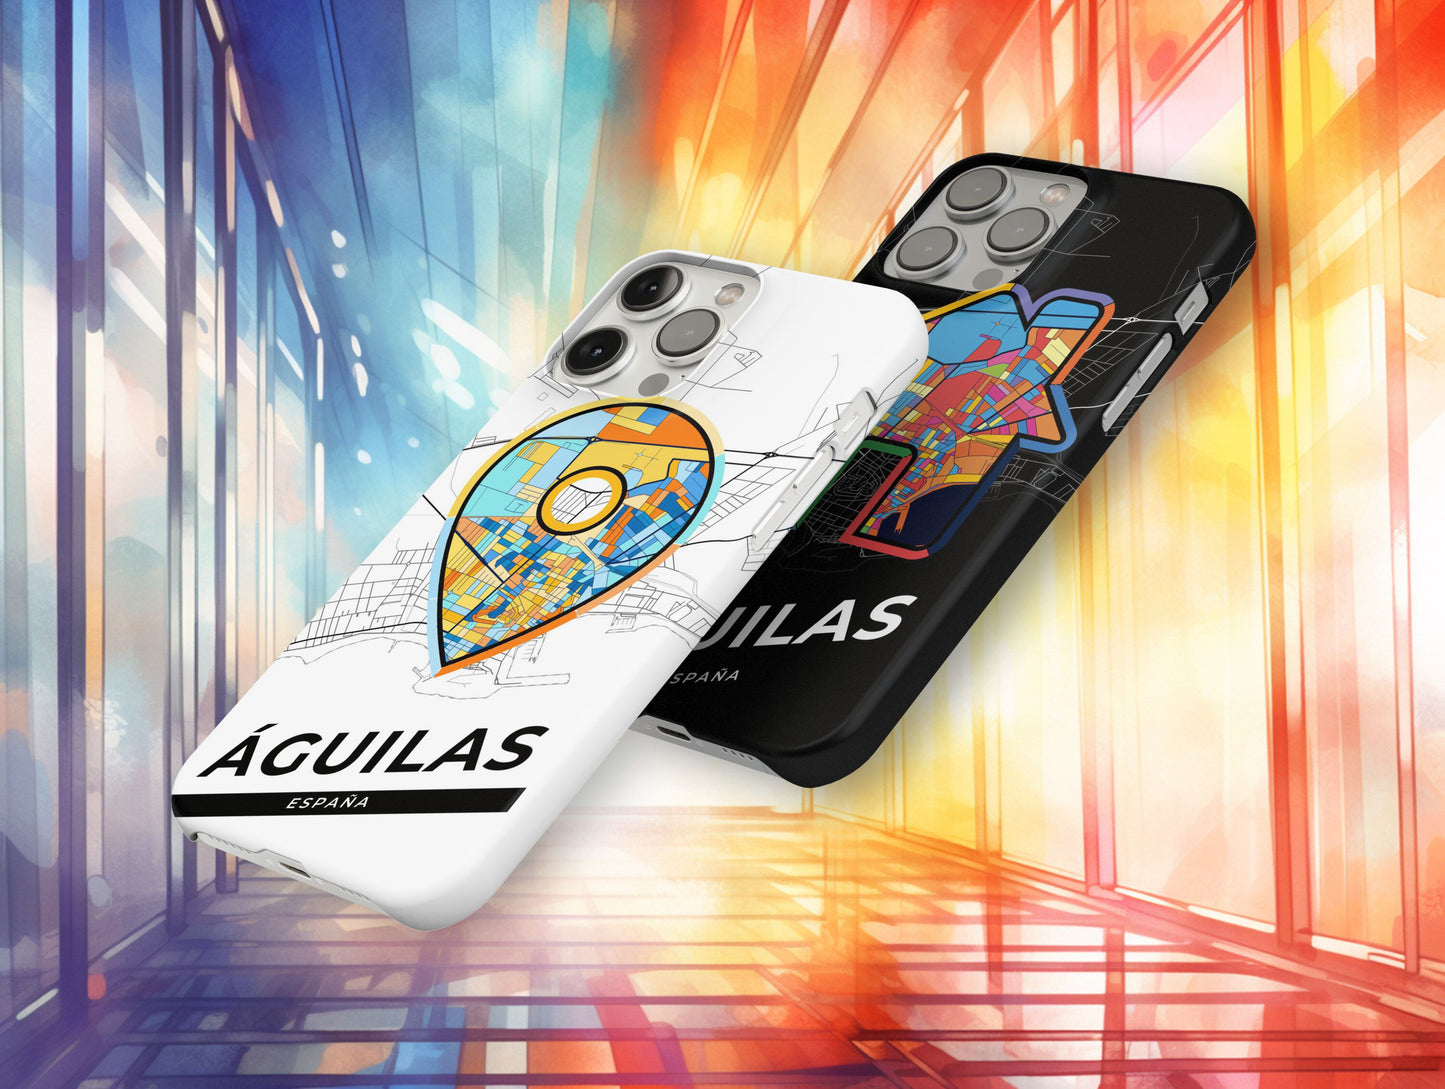 Águilas Spain slim phone case with colorful icon. Birthday, wedding or housewarming gift. Couple match cases.